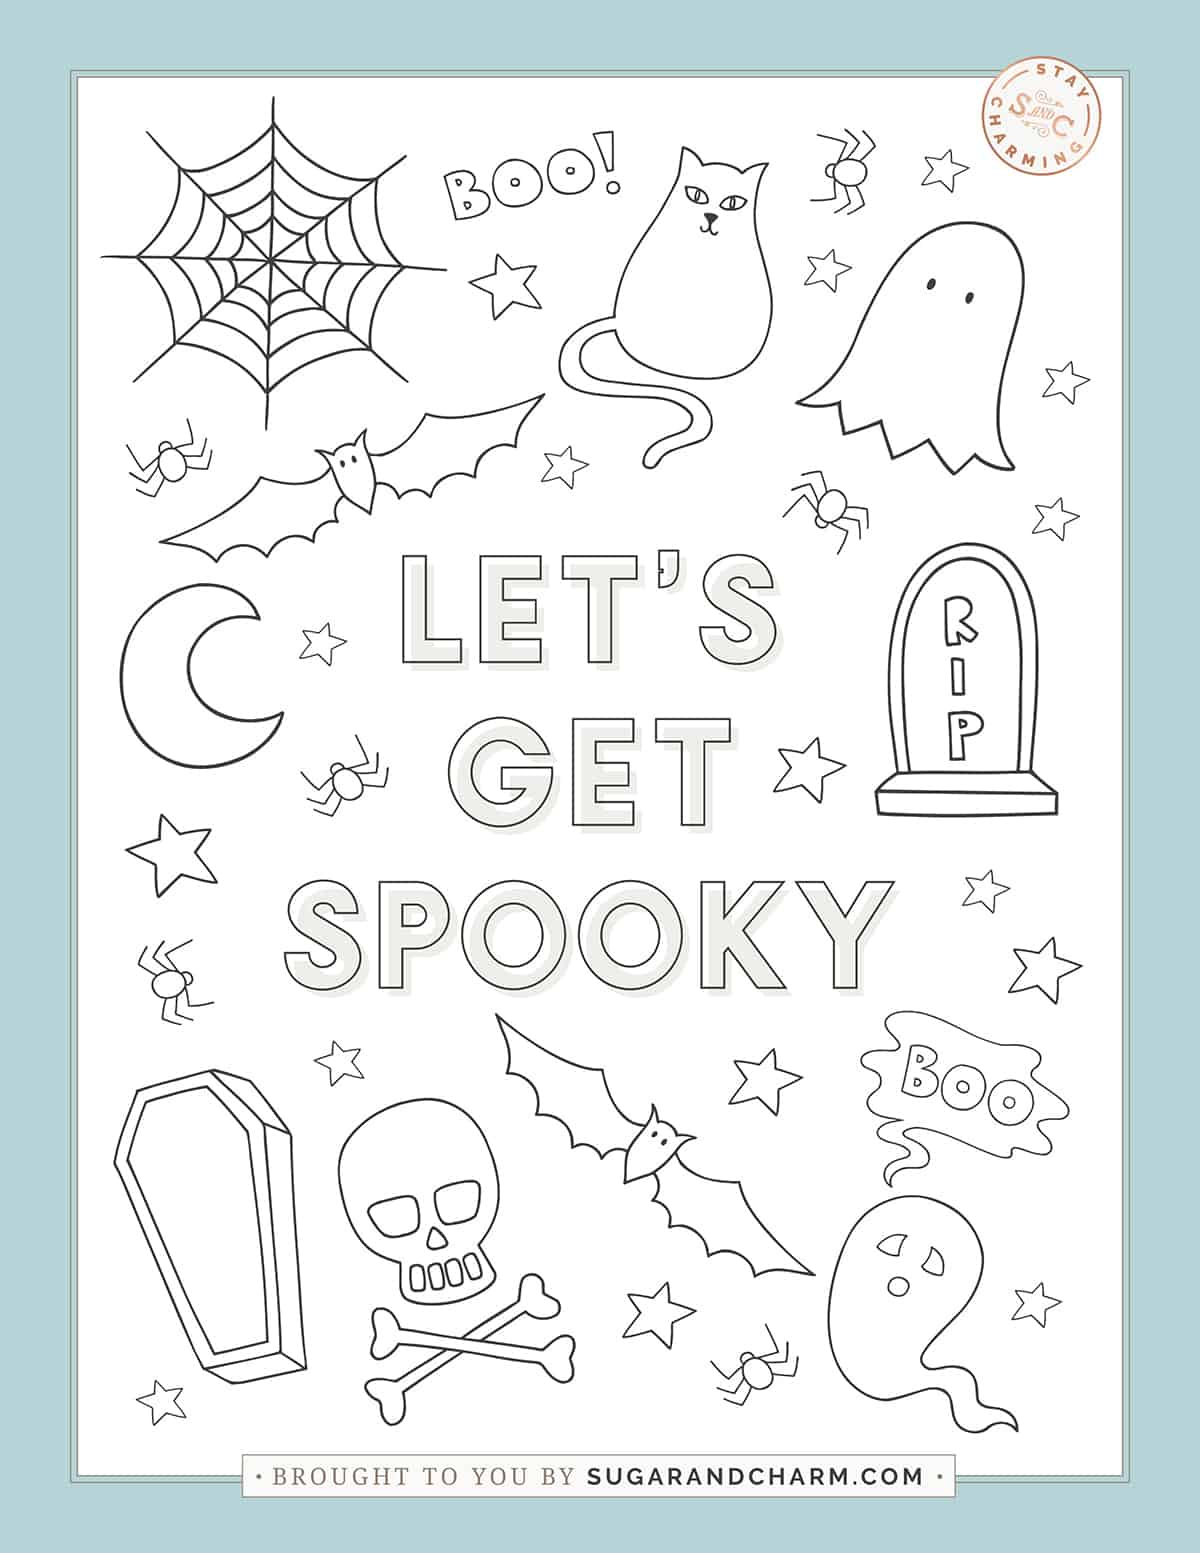 halloween coloring pages - free halloween coloring pages. halloween coloring sheets, free coloring pages, halloween printables, spooky fun, coloring fun